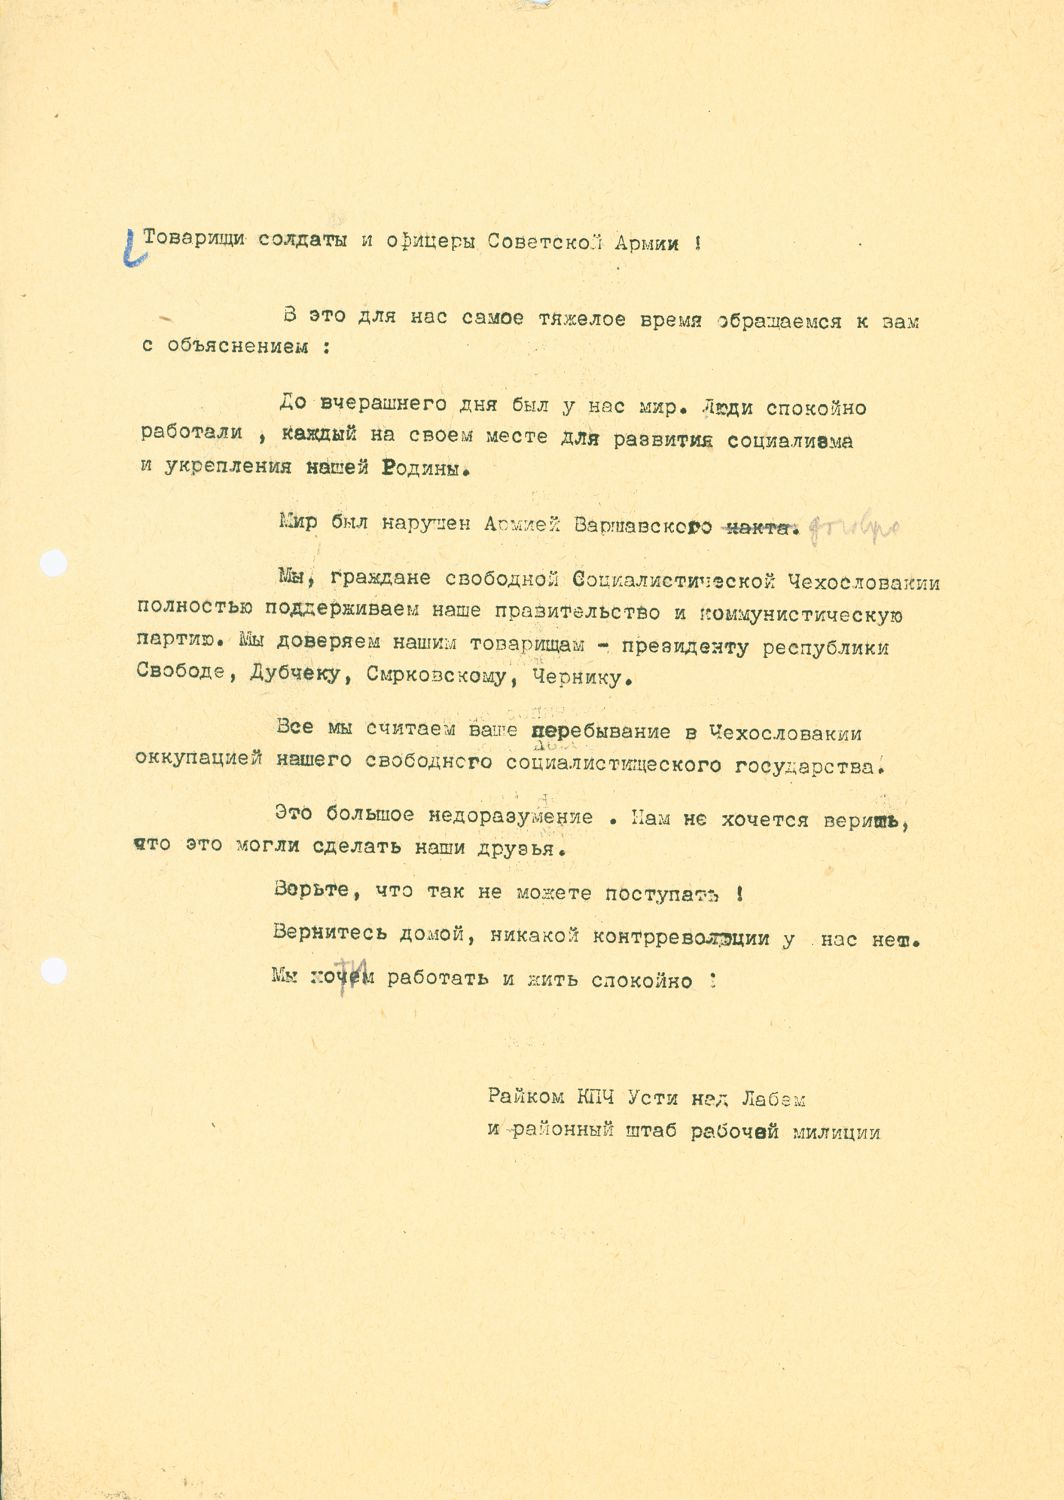 Appeal of the Ústí nad Labem Workers' Militia to the Warsaw Pact Armies